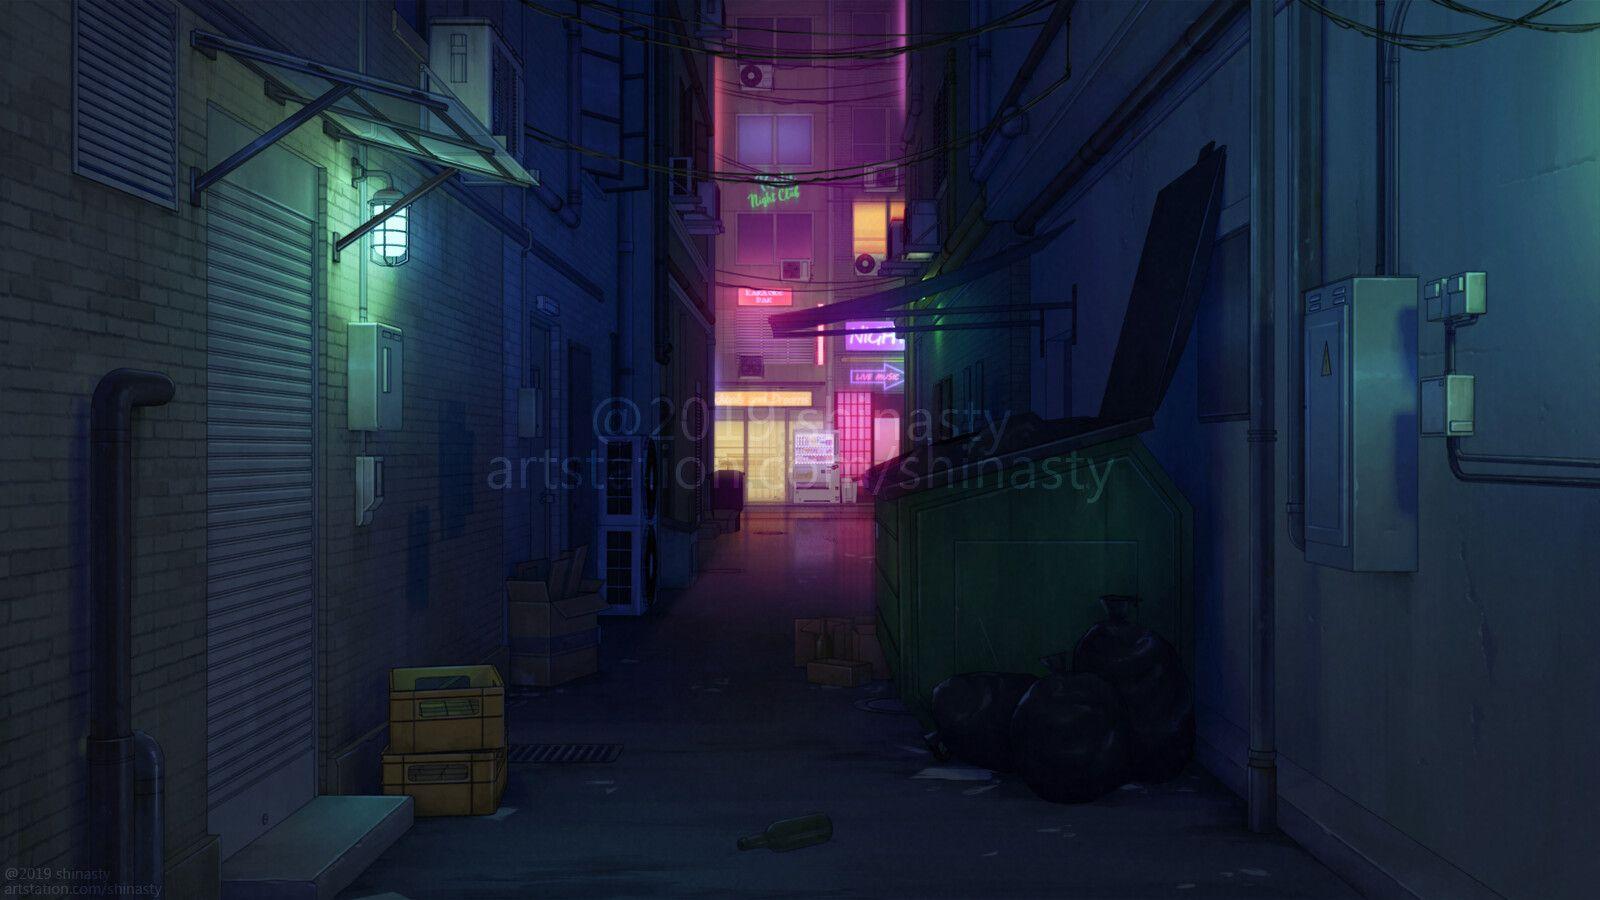 Alley Anime Wallpapers Top Free Alley Anime Backgrounds Wallpaperaccess